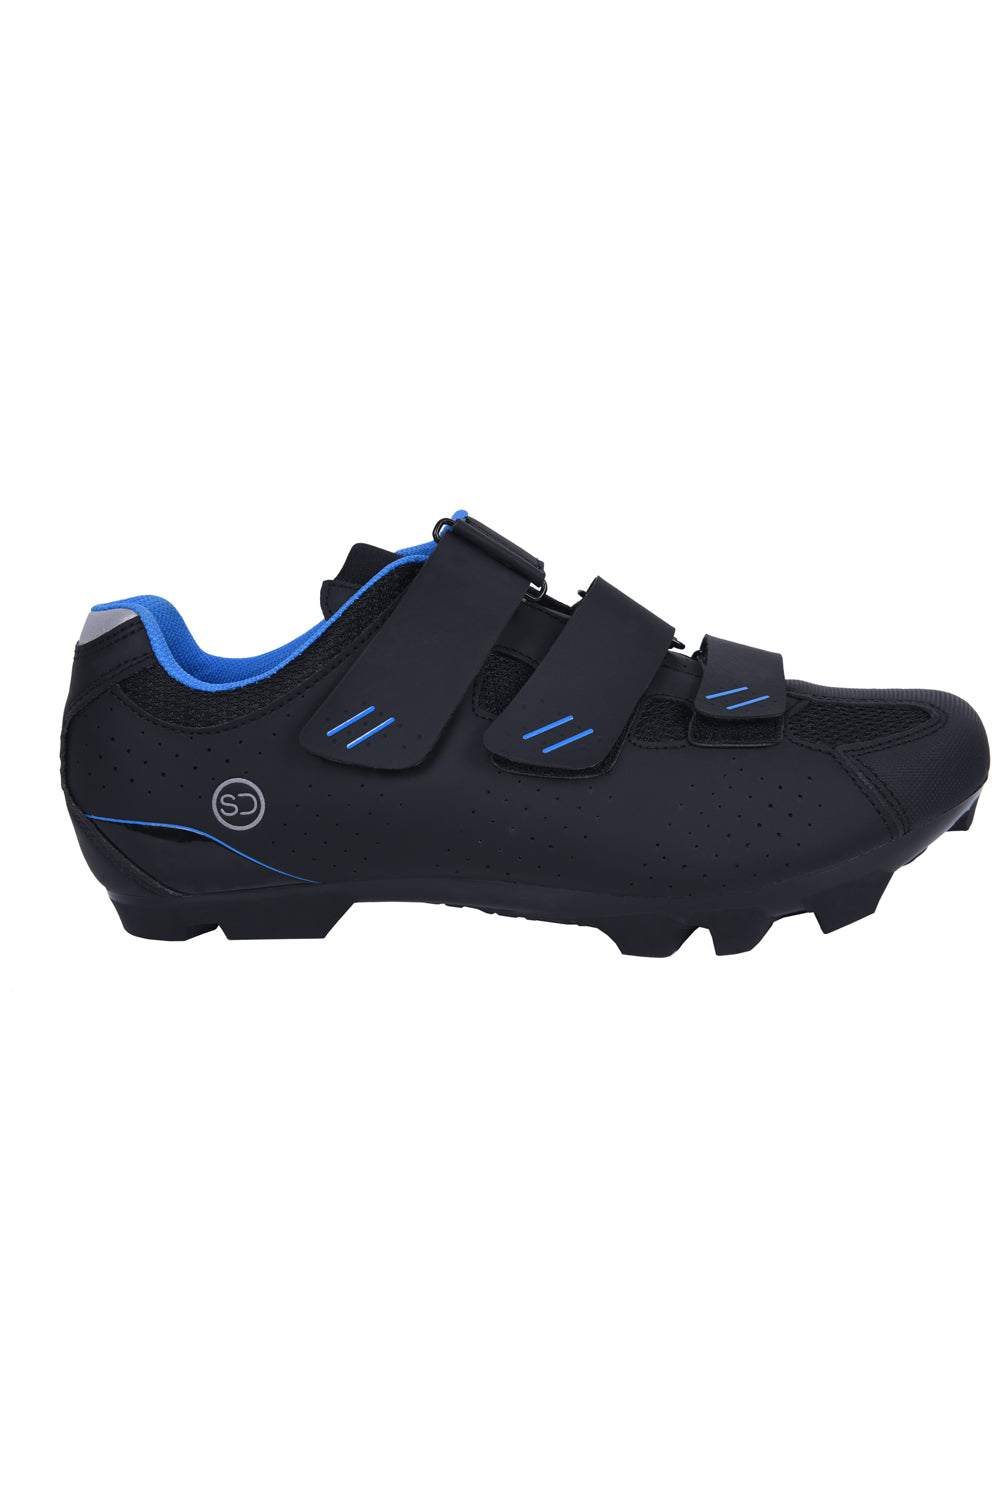 Sundried S-M2 MTB Cycle Shoes Cycle Shoes 48 Blue SD0371 48 Blue Activewear